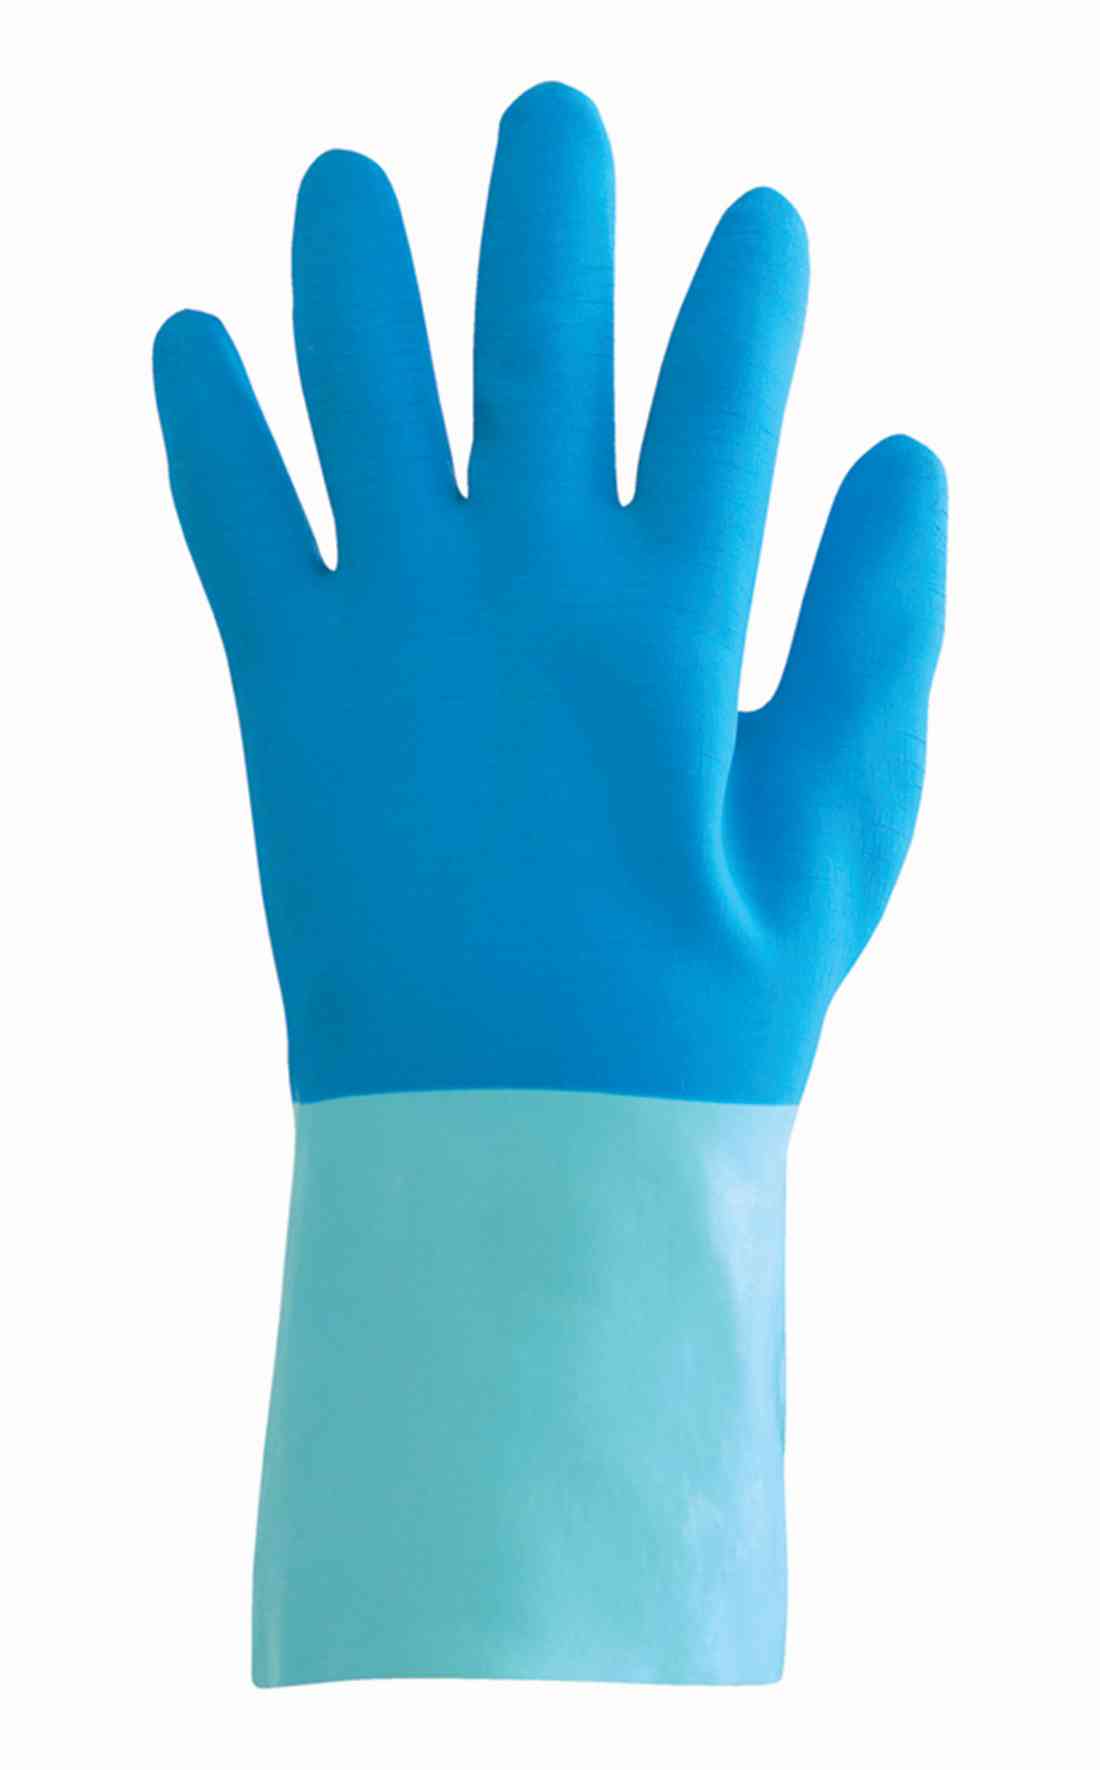 Polyco 850 Taskmaster Natural Latex Chemical Resistant Work Gauntlets